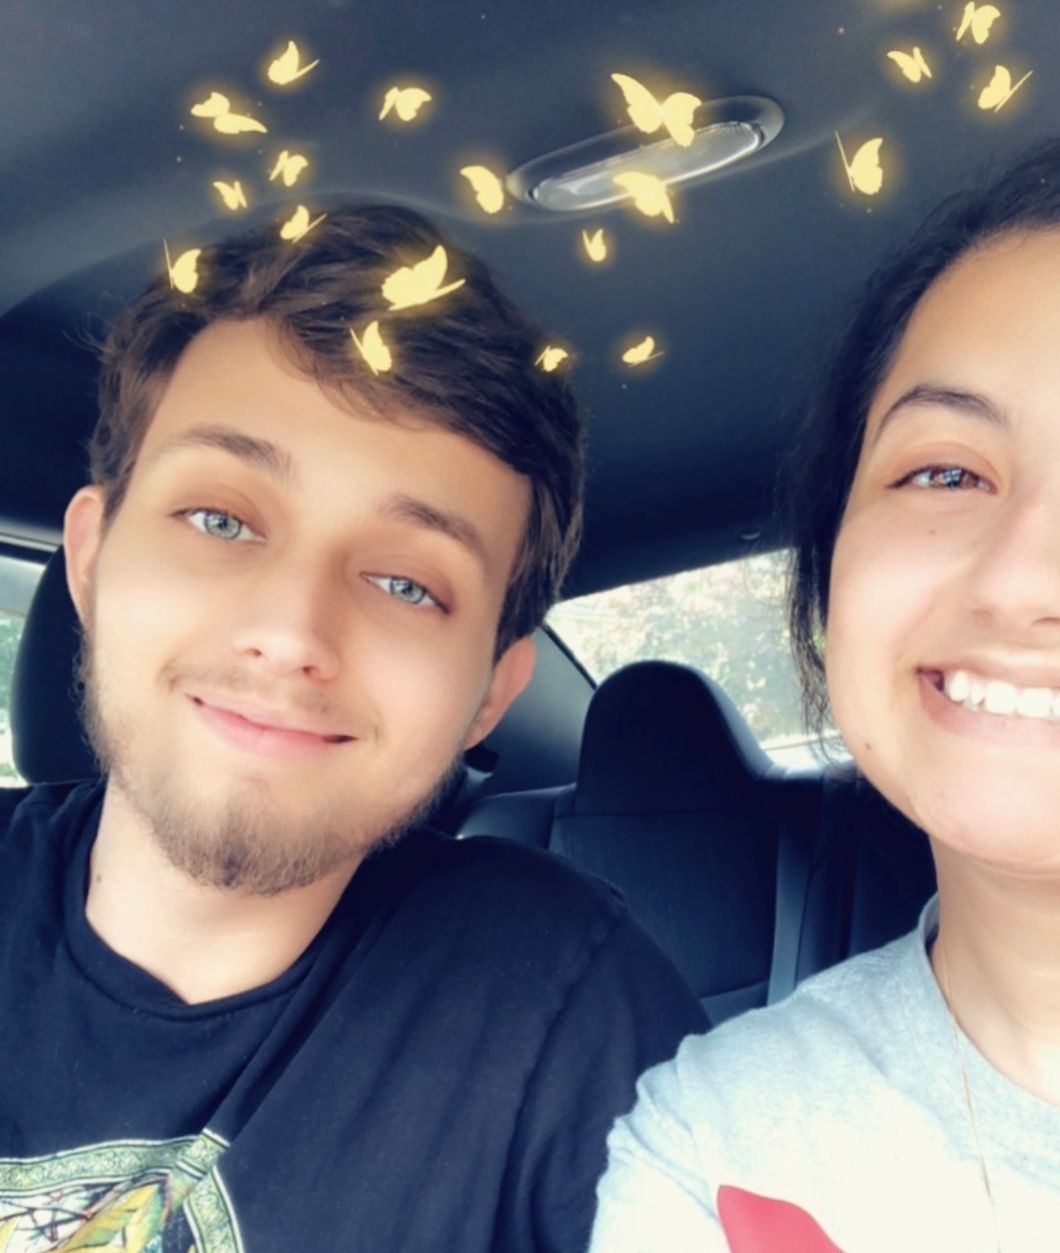 My Boyfriend Went From A Stranger To My Best Friend And I Wouldn't Change A Thing